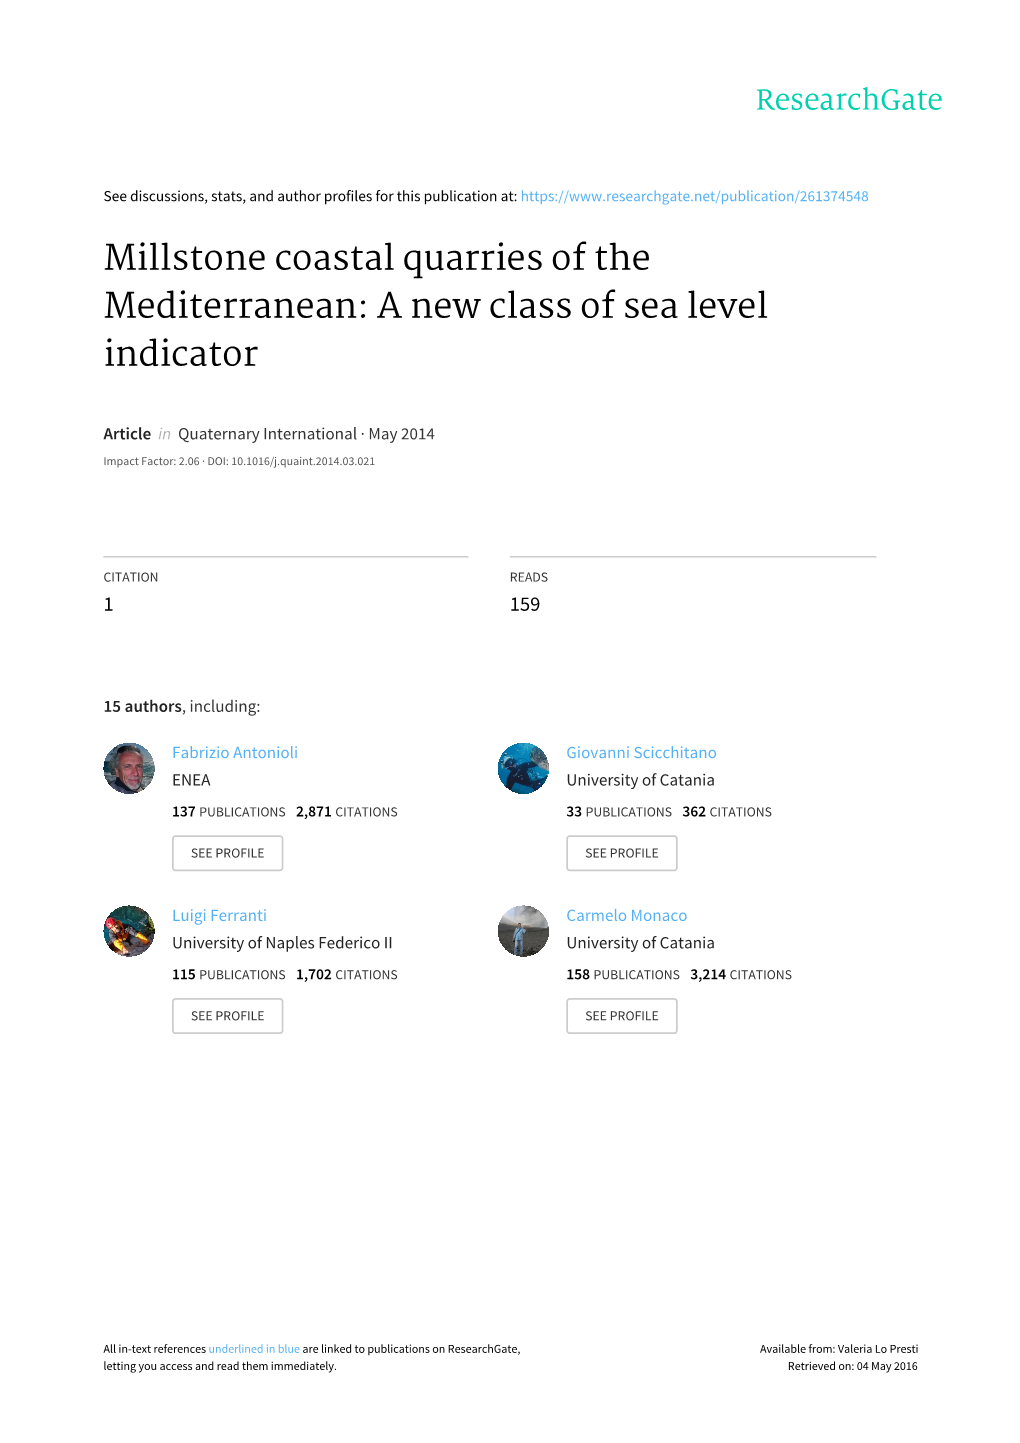 Millstone Coastal Quarries of the Mediterranean: a New Class of Sea Level Indicator